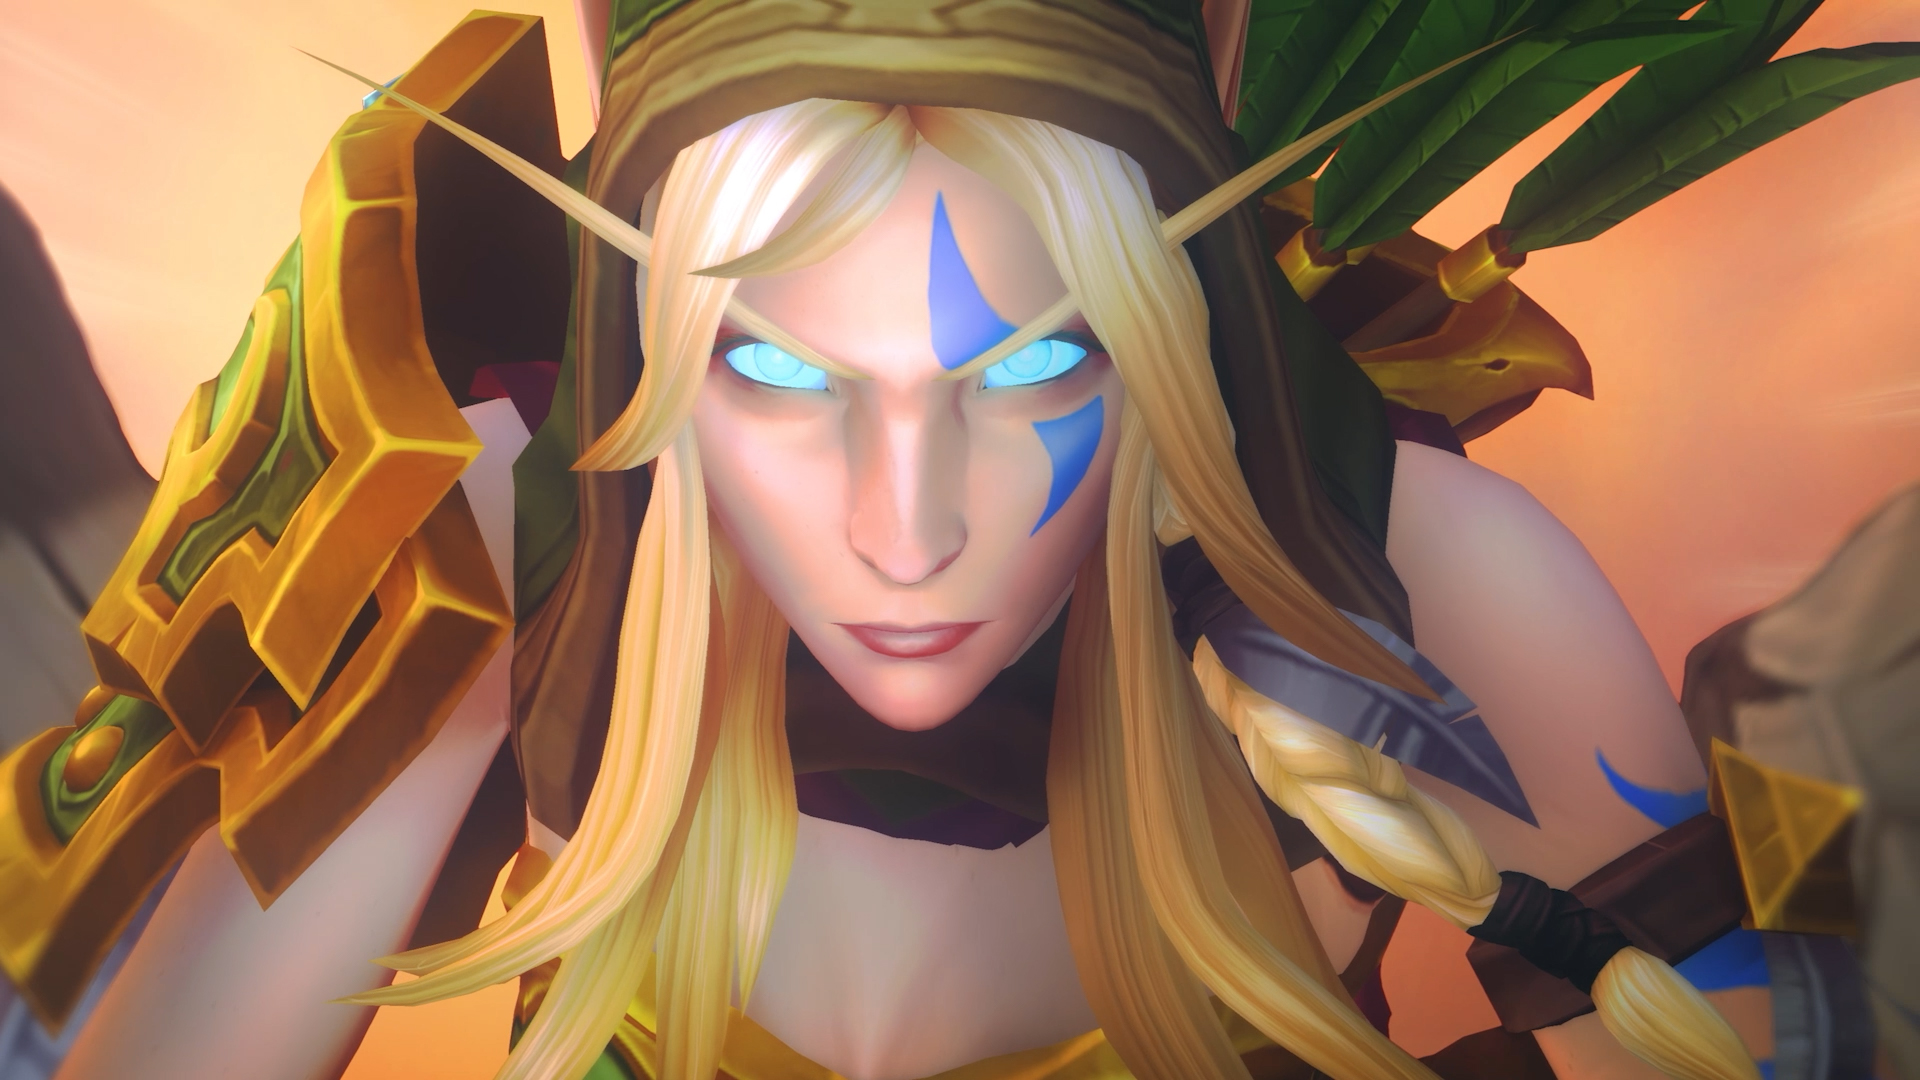 Alleria Windrunner, a World of Warcraft elf, looks determined as she hunches down to focus on something. 